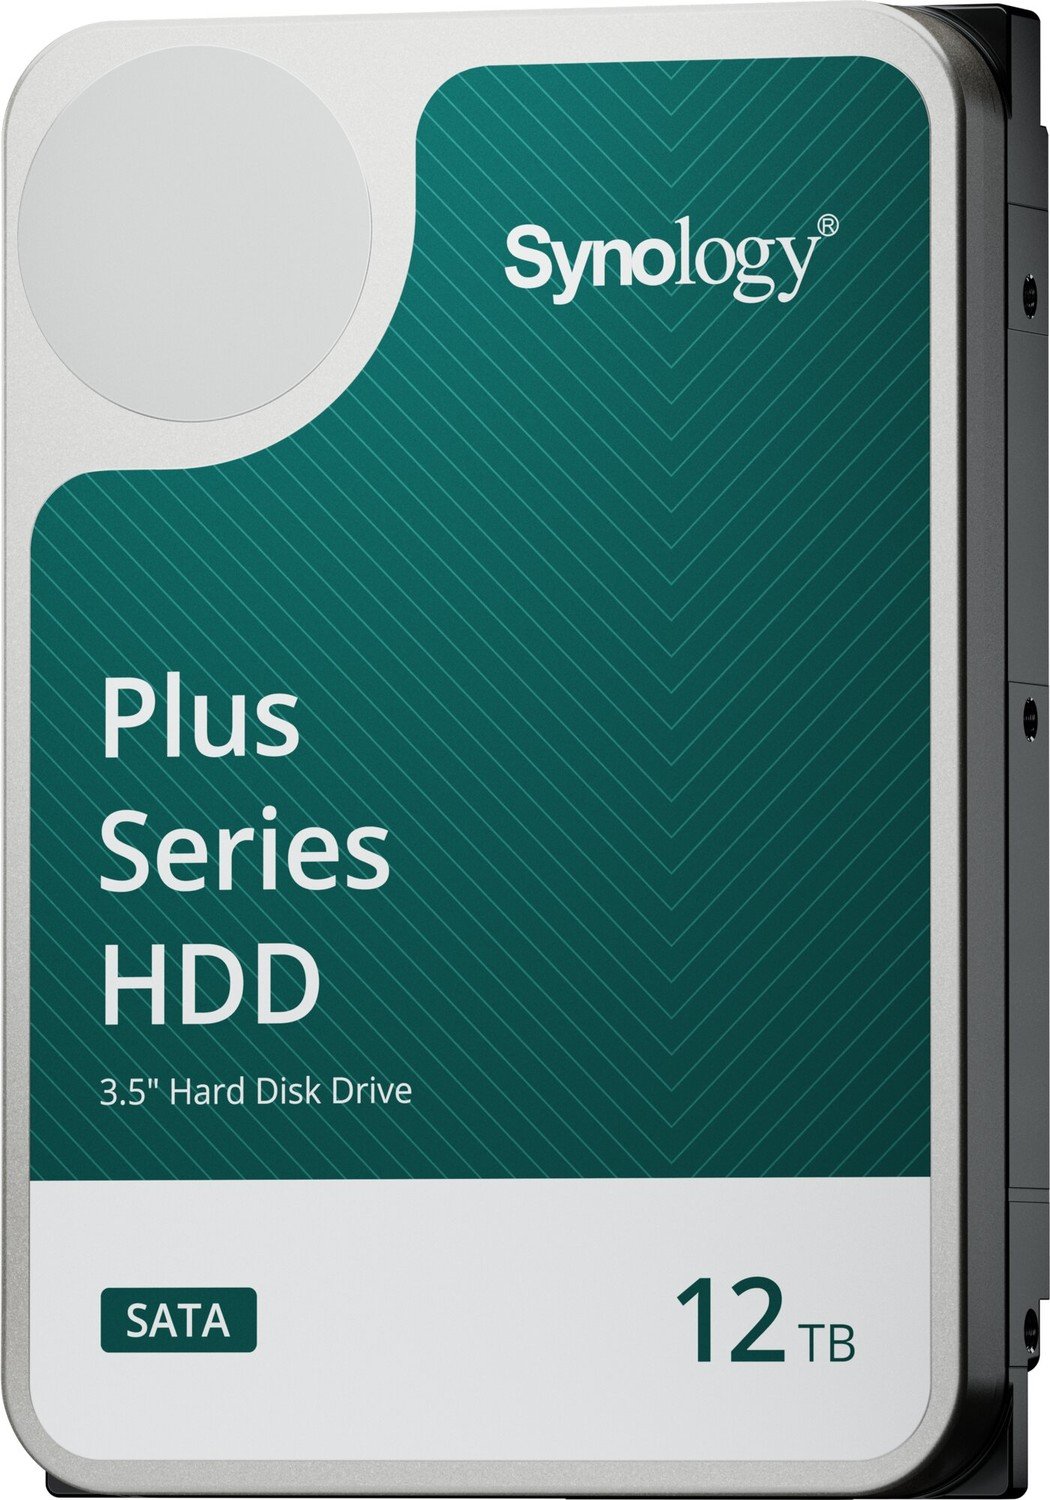 Synology HAT3300-12T, 3.5” - 12TB - HAT3300-12T